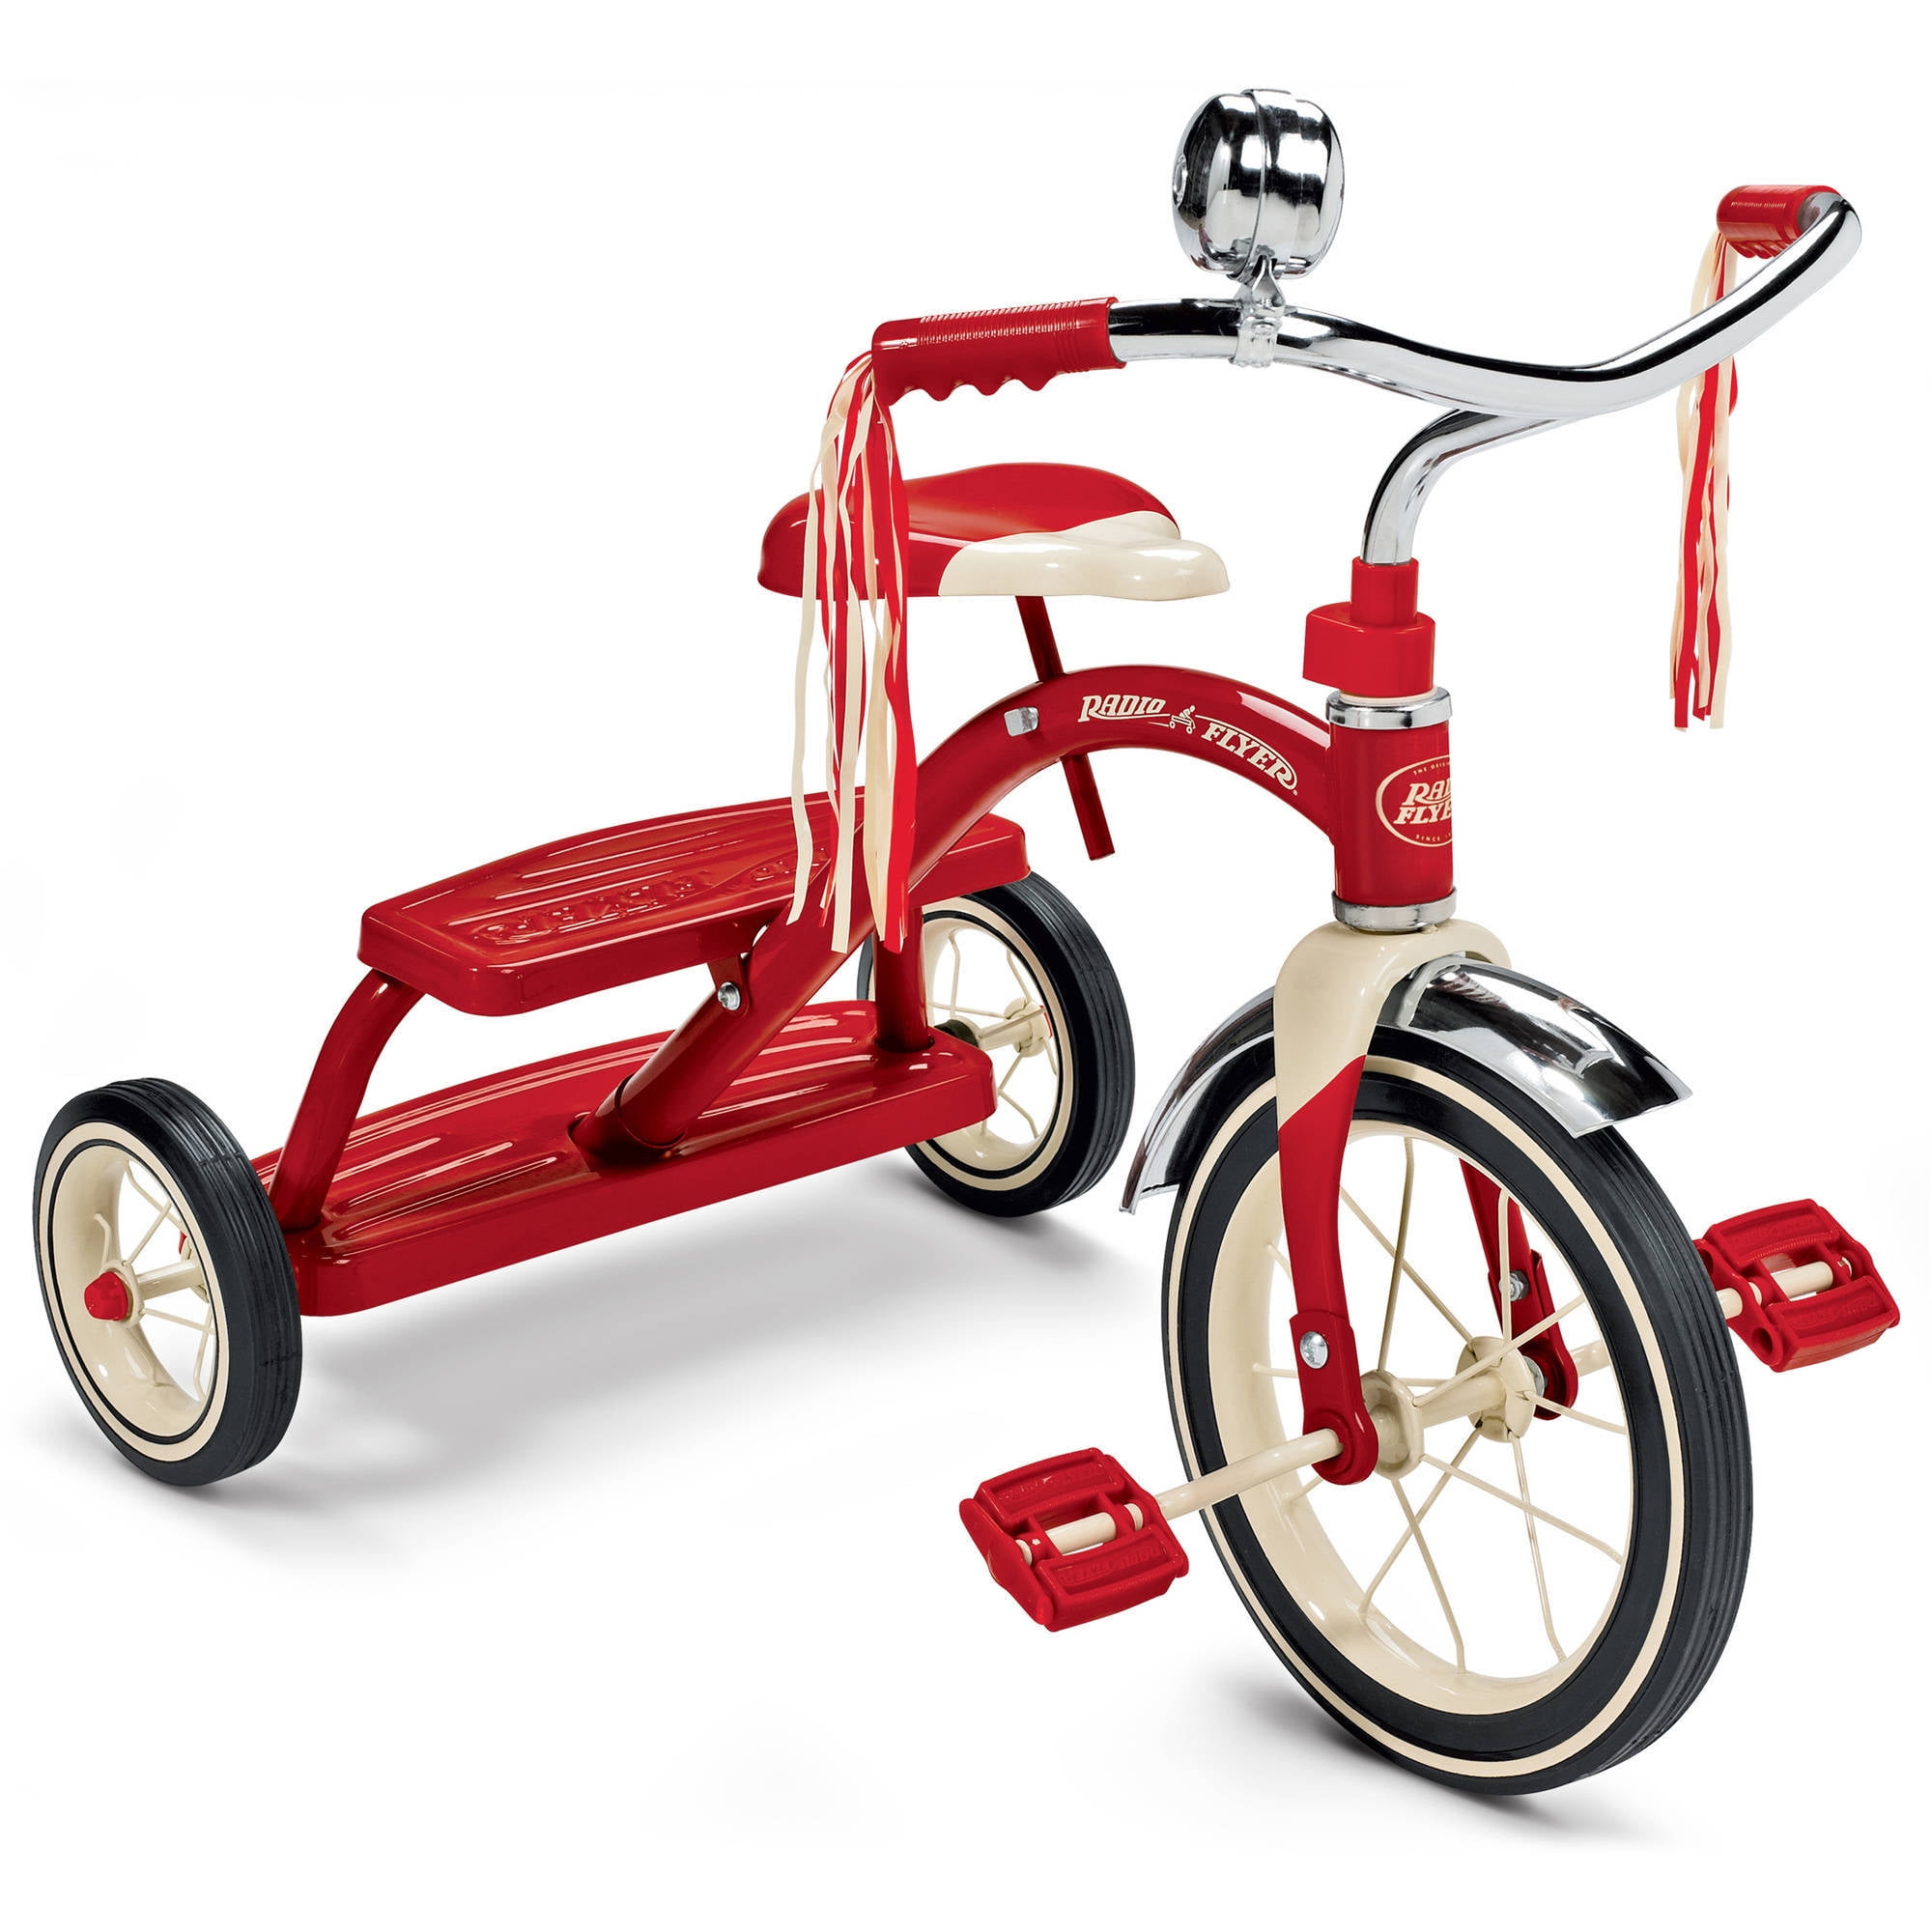 3 in1Kids Foldable Tricycle,Kids Trike with Adjustable Seat and Storage Basket,Carbon Steel Frame Toddle Boys Girls Tricycle 27.5x17.7x19.6inches Suitable for 2-5 Age 